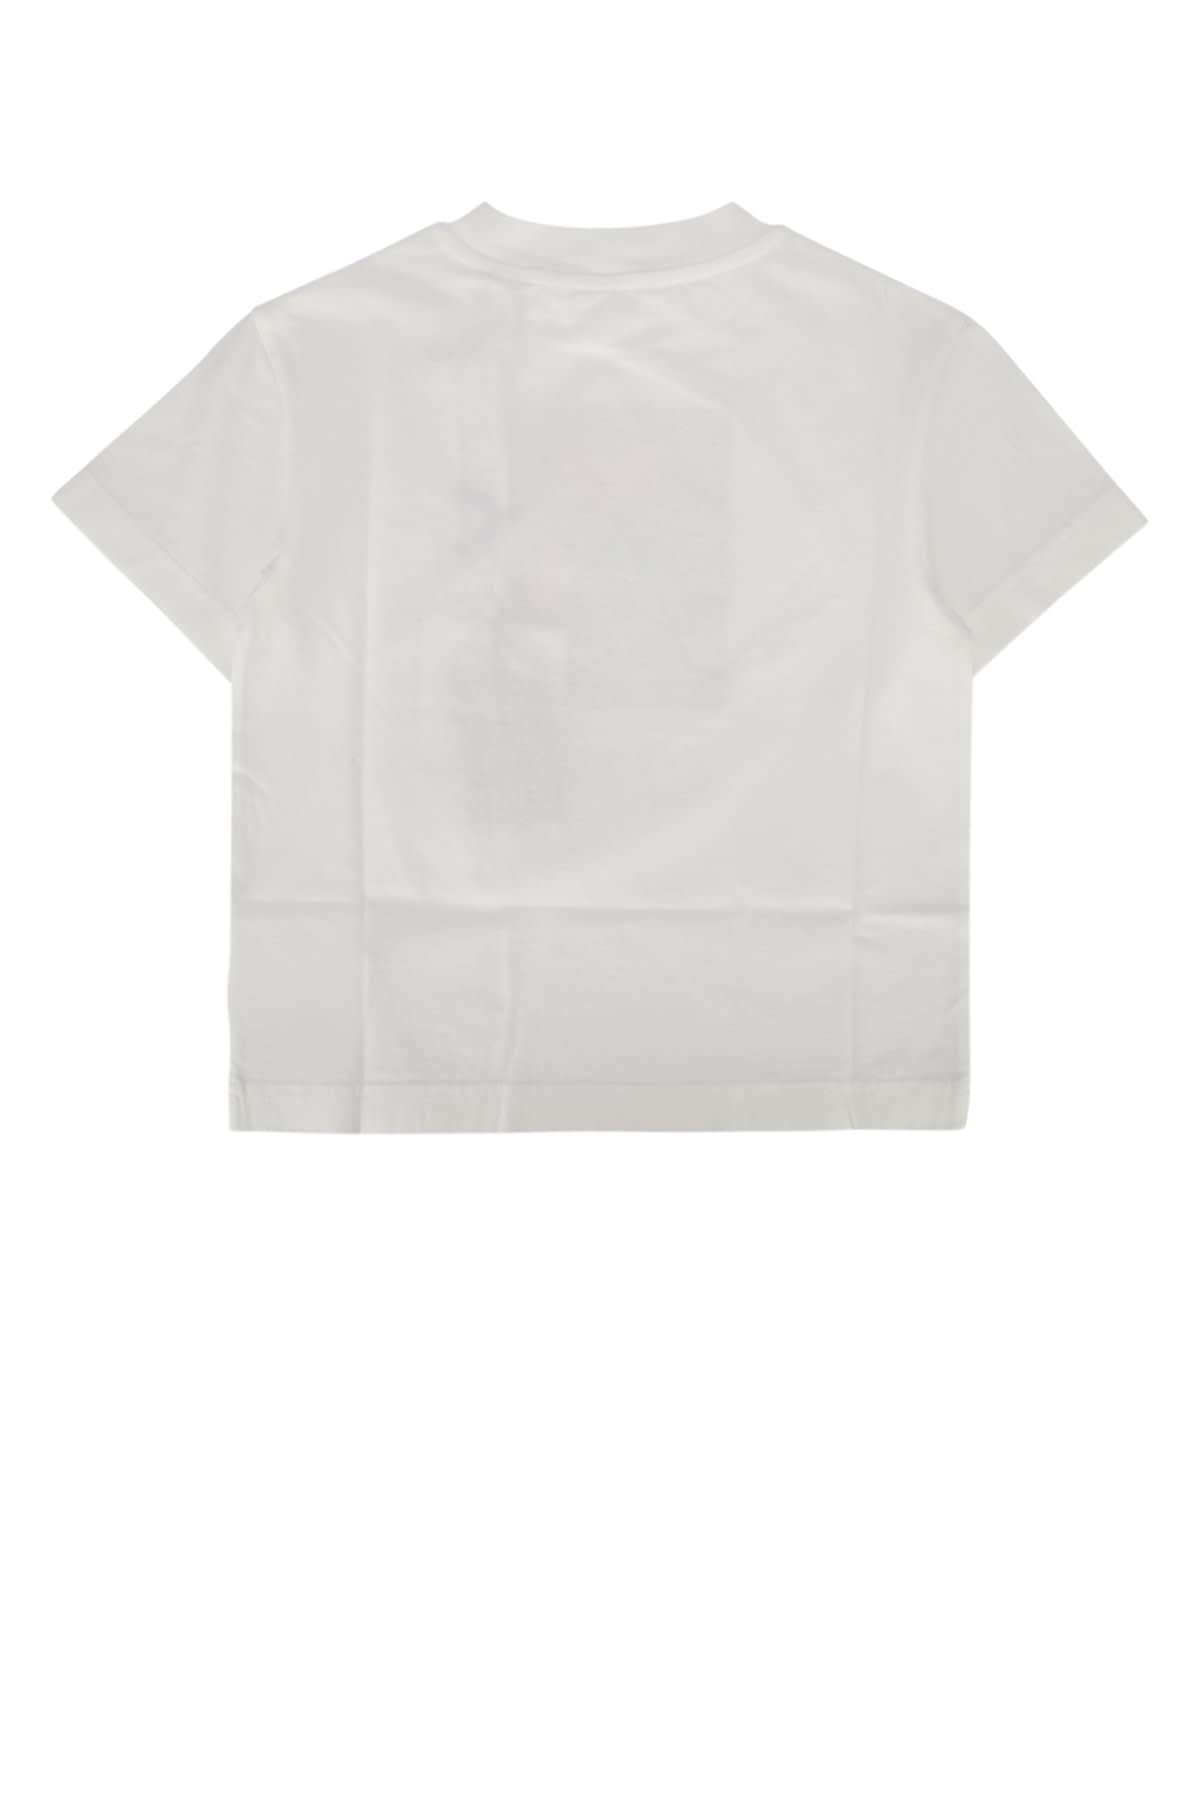 Palm Angels Kids' T-shirt In Offwhite